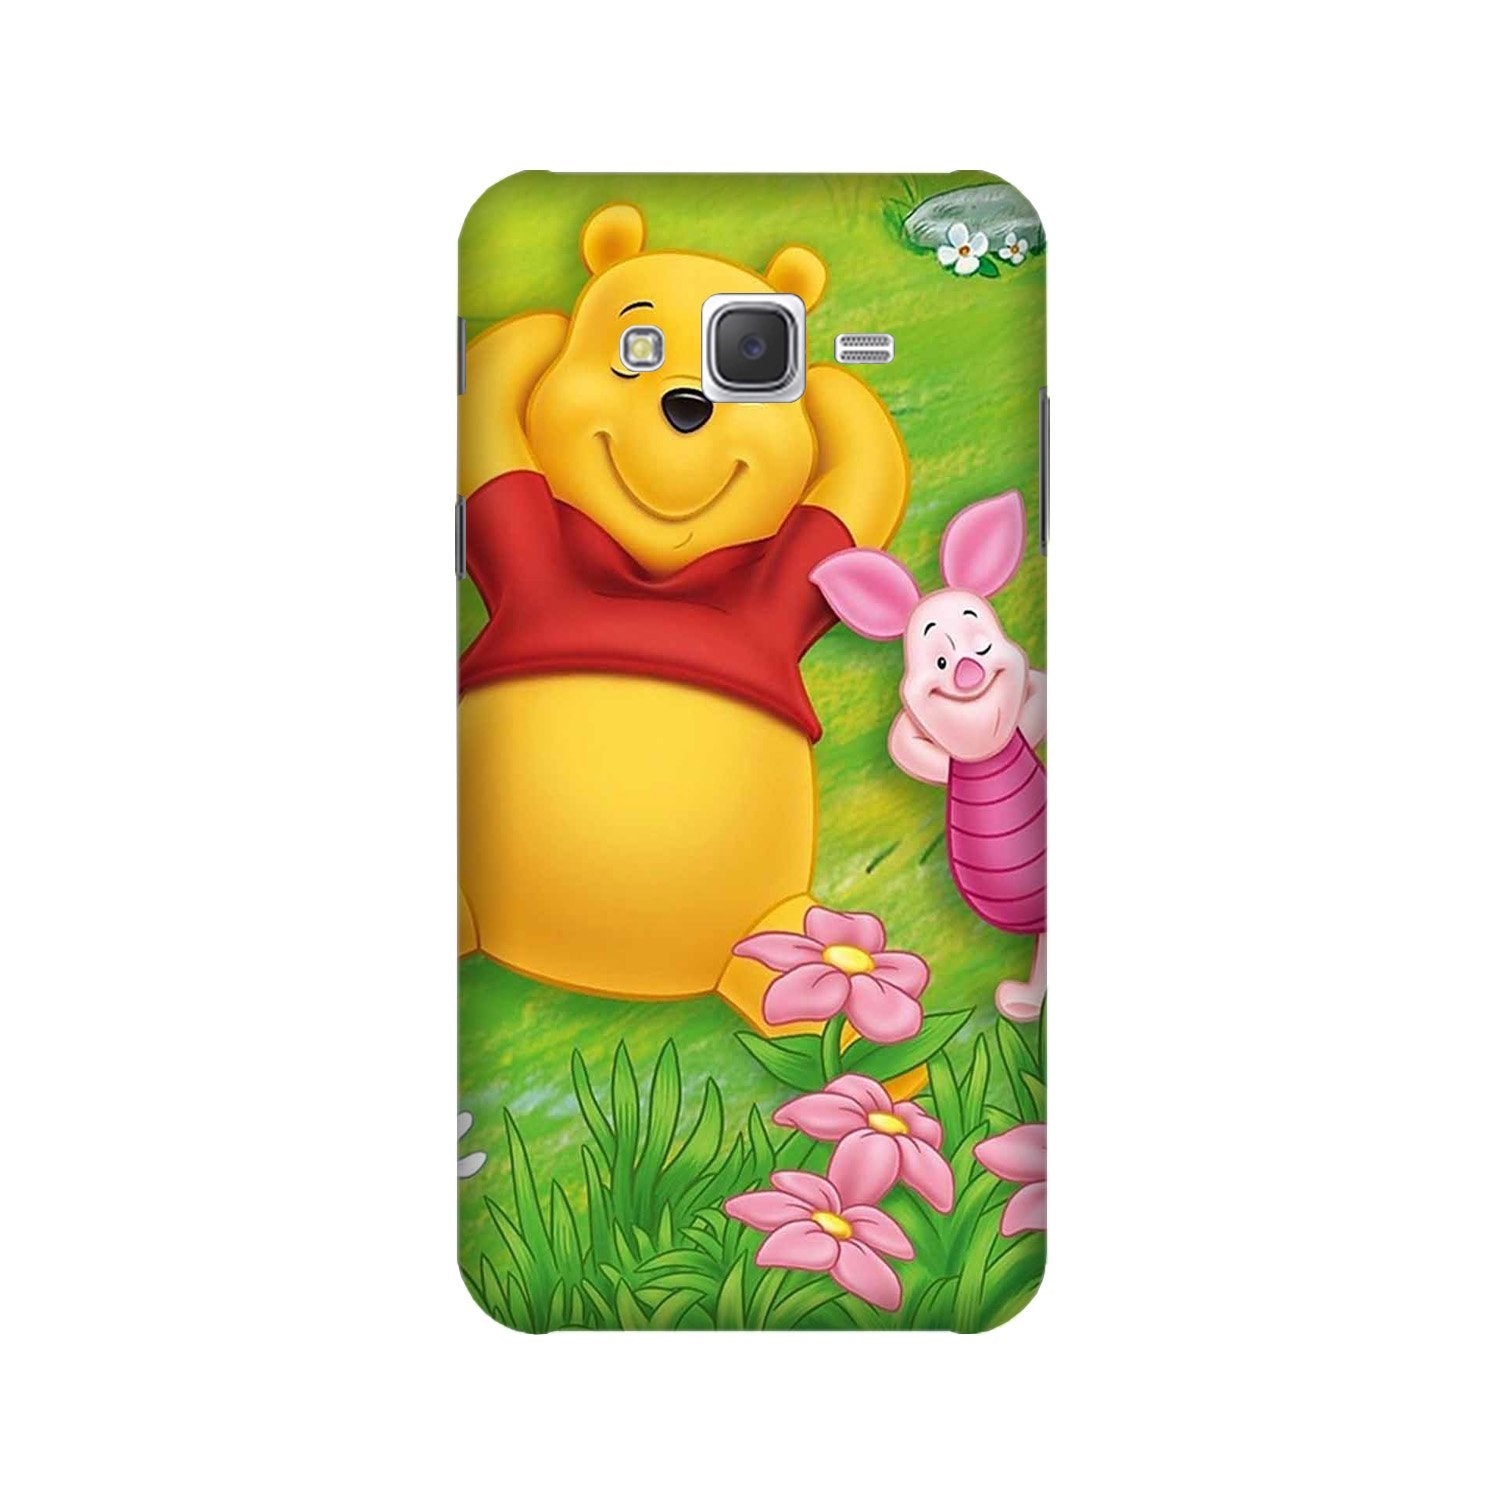 Winnie The Pooh Mobile Back Case for Galaxy J7 (2015) (Design - 348)